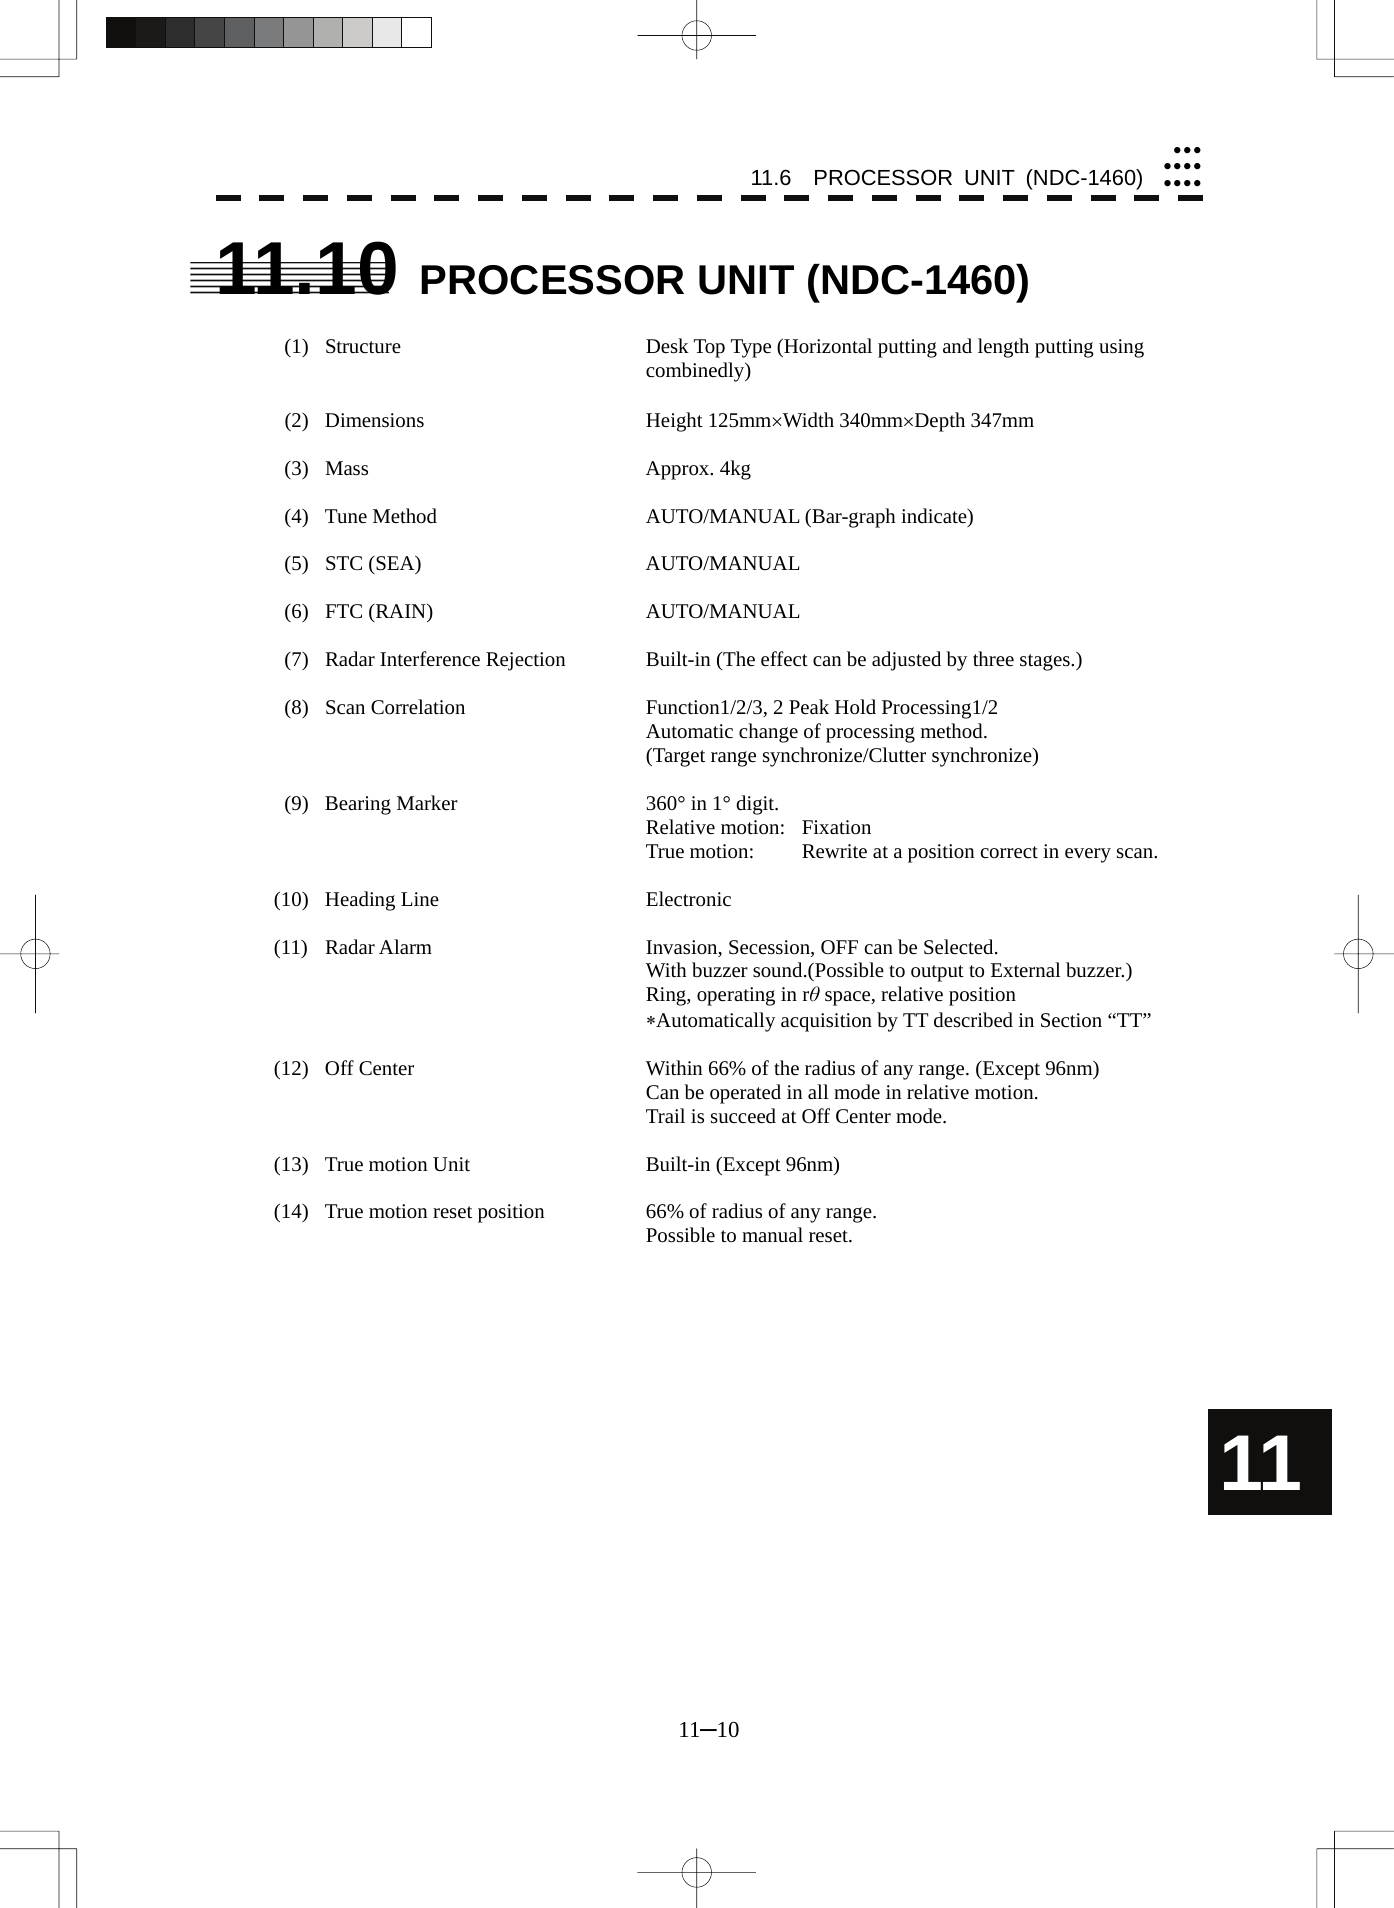 11.6  PROCESSOR UNIT (NDC-1460) 11─10 yyyyyyyyyyy11 11.10  PROCESSOR UNIT (NDC-1460)    (1)  Structure  Desk Top Type (Horizontal putting and length putting using combinedly)   (2)  Dimensions  Height 125mm×Width 340mm×Depth 347mm   (3)  Mass  Approx. 4kg    (4)  Tune Method  AUTO/MANUAL (Bar-graph indicate)   (5)  STC (SEA)  AUTO/MANUAL   (6)  FTC (RAIN)  AUTO/MANUAL    (7)  Radar Interference Rejection  Built-in (The effect can be adjusted by three stages.)    (8)  Scan Correlation  Function1/2/3, 2 Peak Hold Processing1/2     Automatic change of processing method.       (Target range synchronize/Clutter synchronize)    (9)  Bearing Marker  360° in 1° digit.    Relative motion: Fixation     True motion:  Rewrite at a position correct in every scan.  (10) Heading Line  Electronic  (11)  Radar Alarm  Invasion, Secession, OFF can be Selected.     With buzzer sound.(Possible to output to External buzzer.)     Ring, operating in rθ space, relative position    ∗Automatically acquisition by TT described in Section “TT”  (12)  Off Center  Within 66% of the radius of any range. (Except 96nm)     Can be operated in all mode in relative motion.     Trail is succeed at Off Center mode.  (13)  True motion Unit  Built-in (Except 96nm)  (14)  True motion reset position  66% of radius of any range.     Possible to manual reset.  